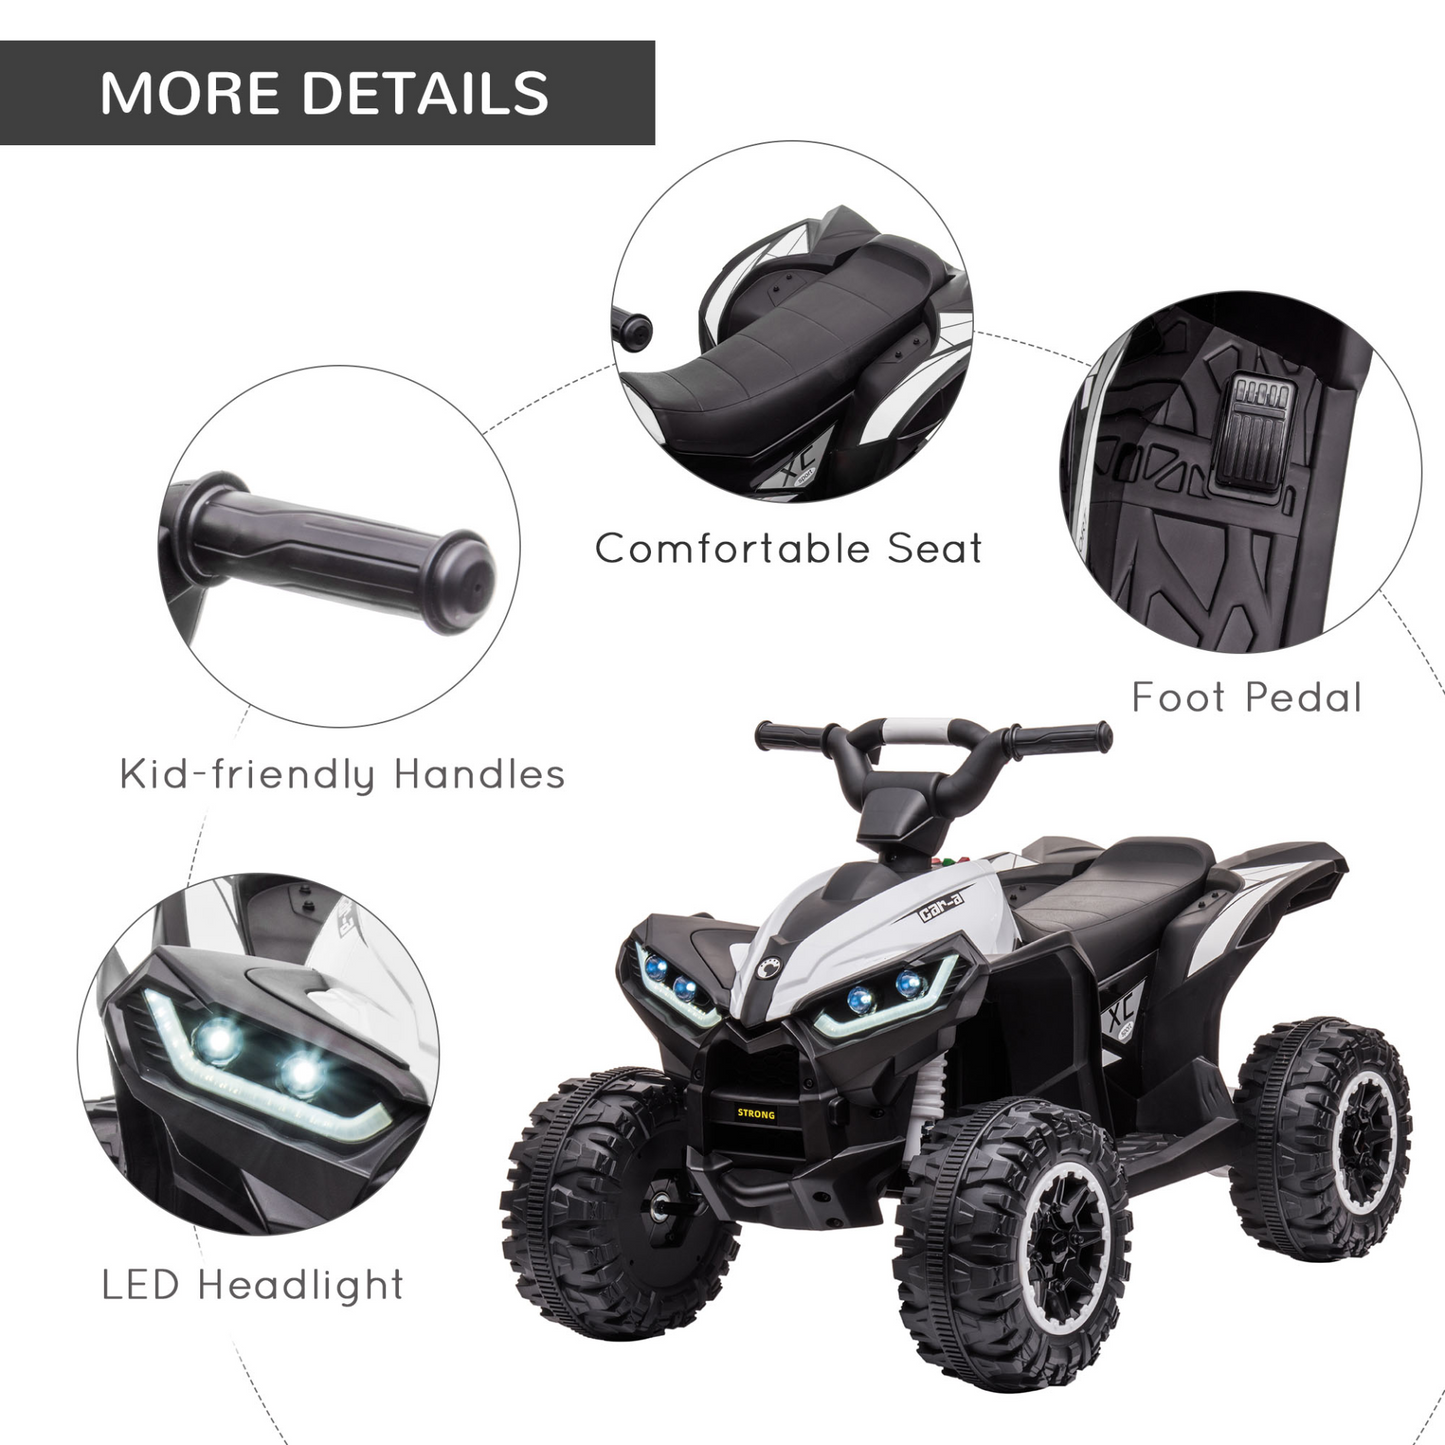 HOMCOM 12V Electric Quad Bikes for Kids Ride On Car ATV Toy, with Forward Reverse Functions, LED Headlights, for Ages 3-5 Years - White